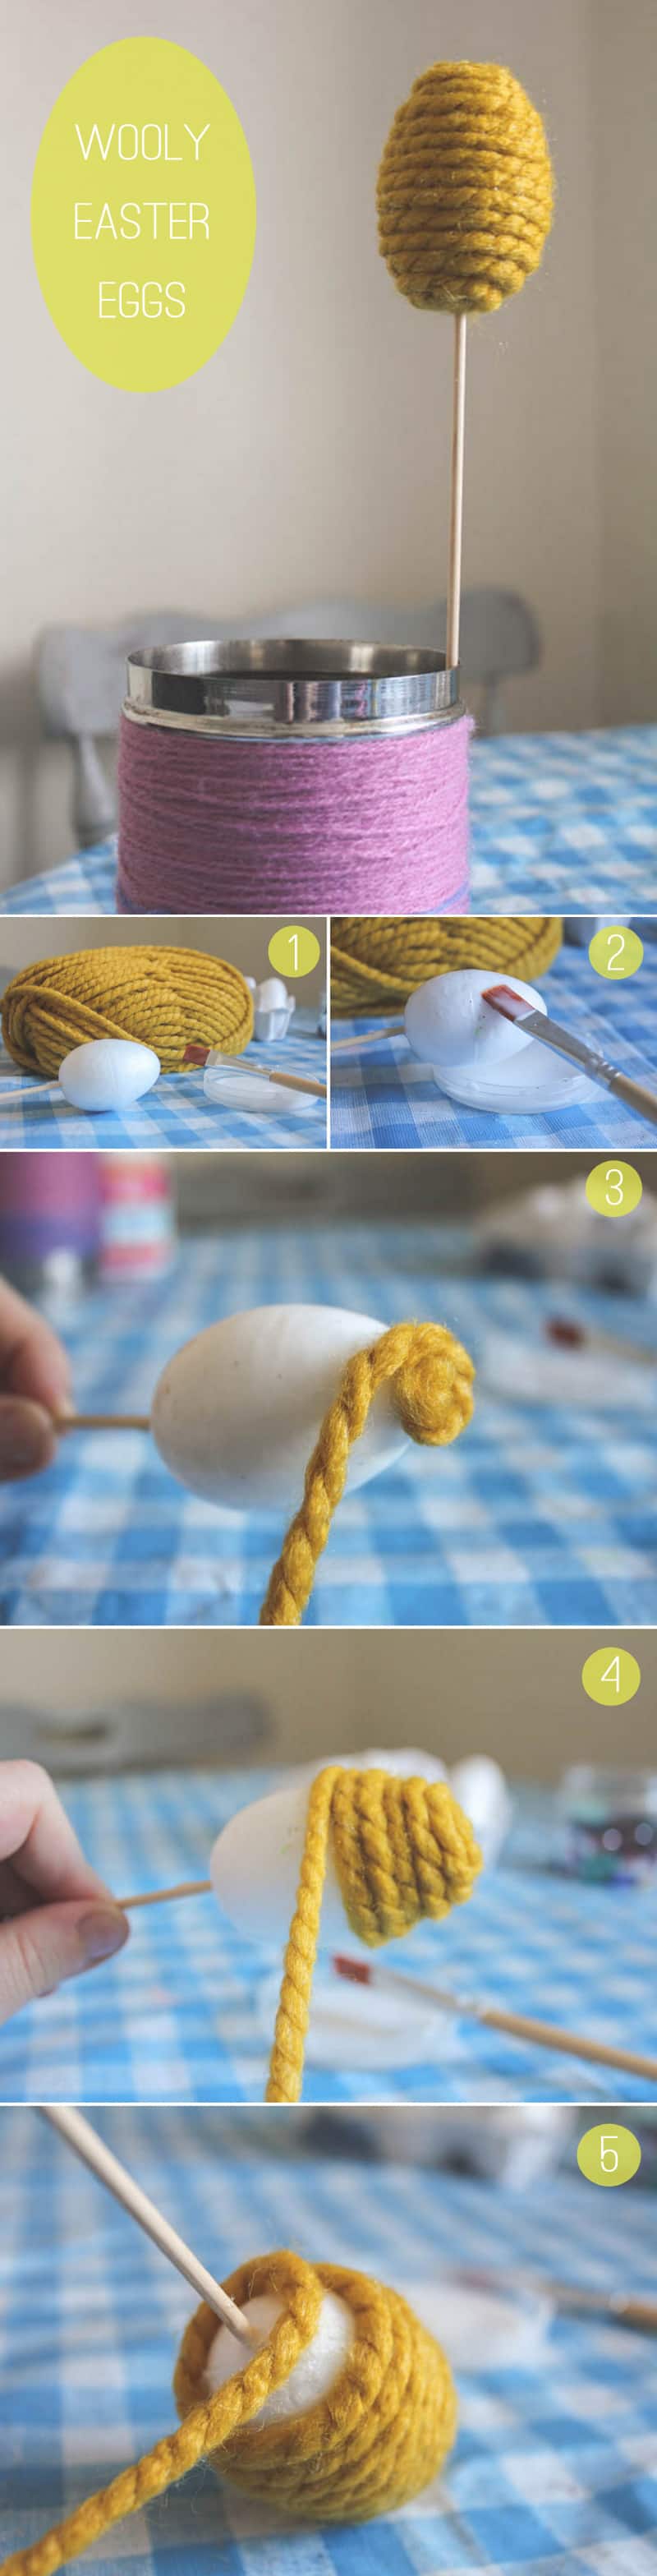 How to Make Wooly Easter Eggs